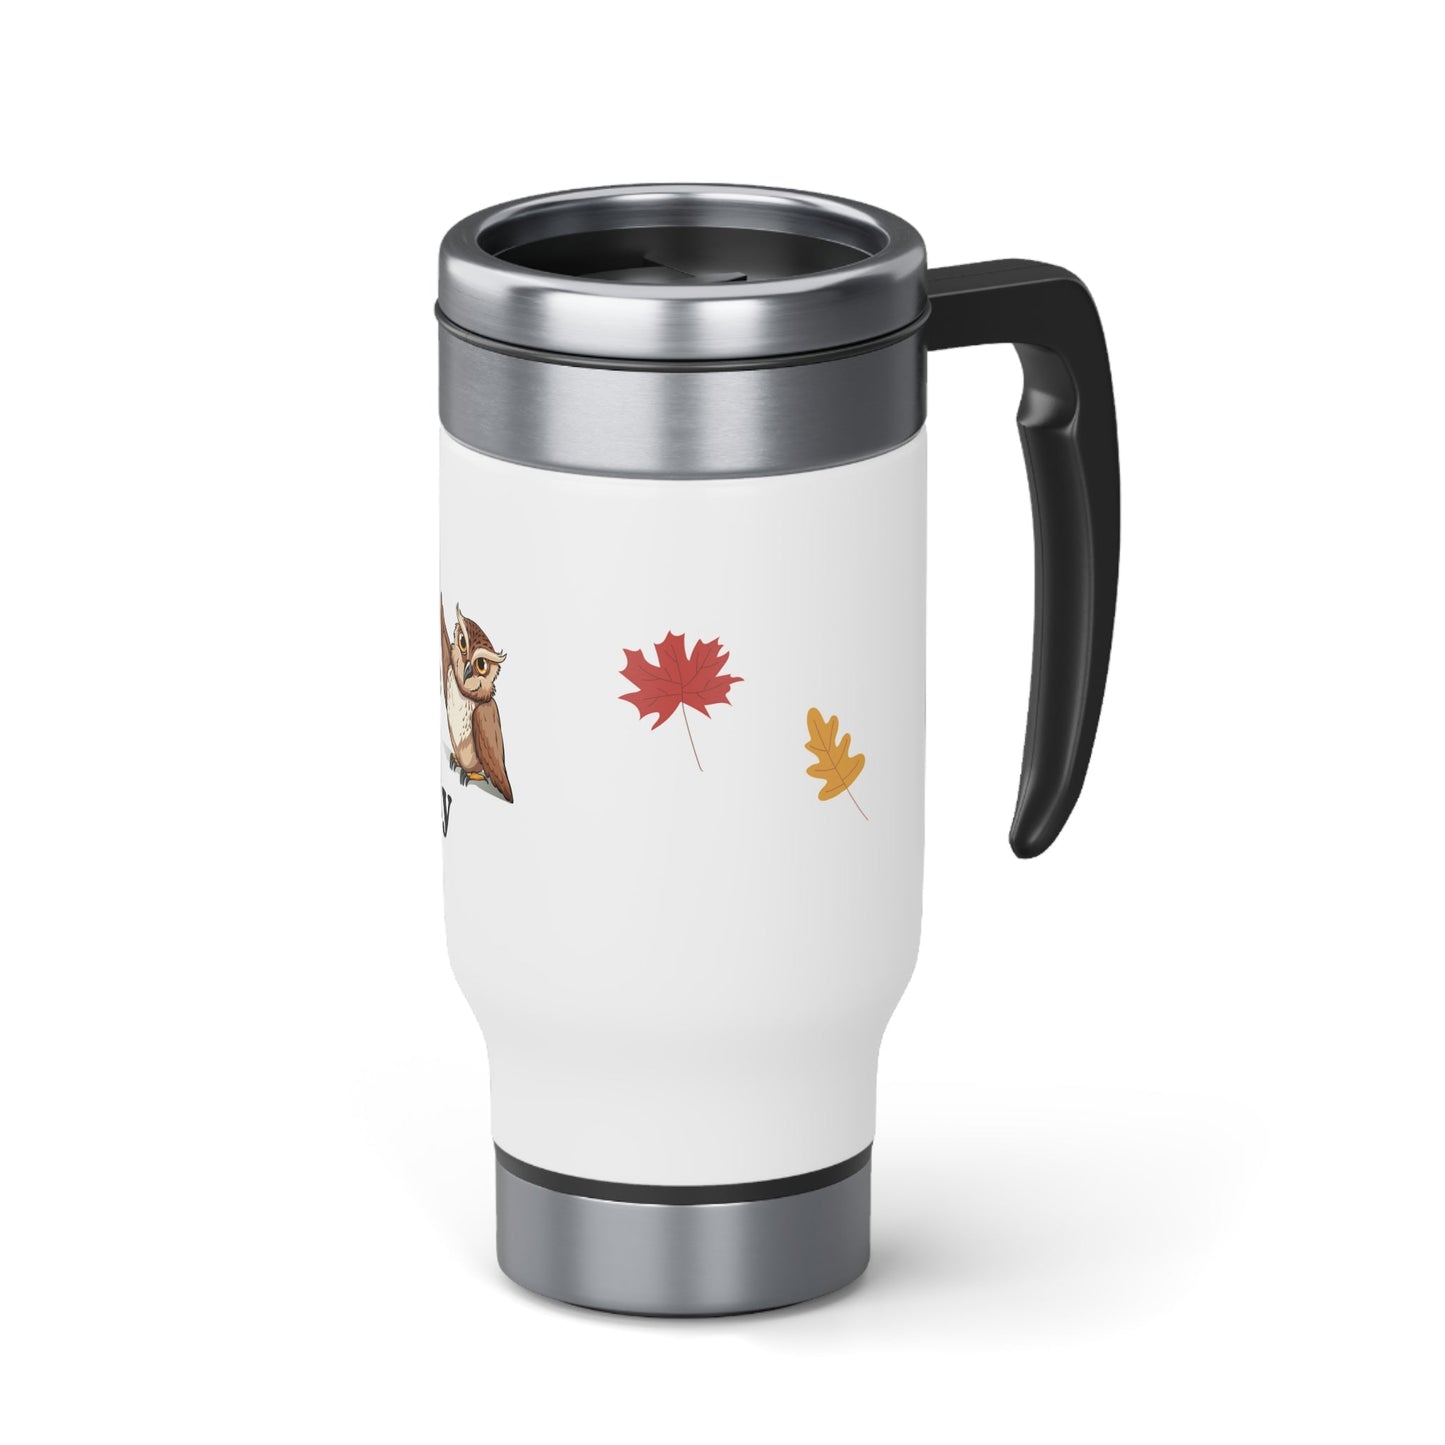 After Summer Comes the Fall of the Patriarchy Feminist Stainless Steel Travel Mug with Handle, 14oz